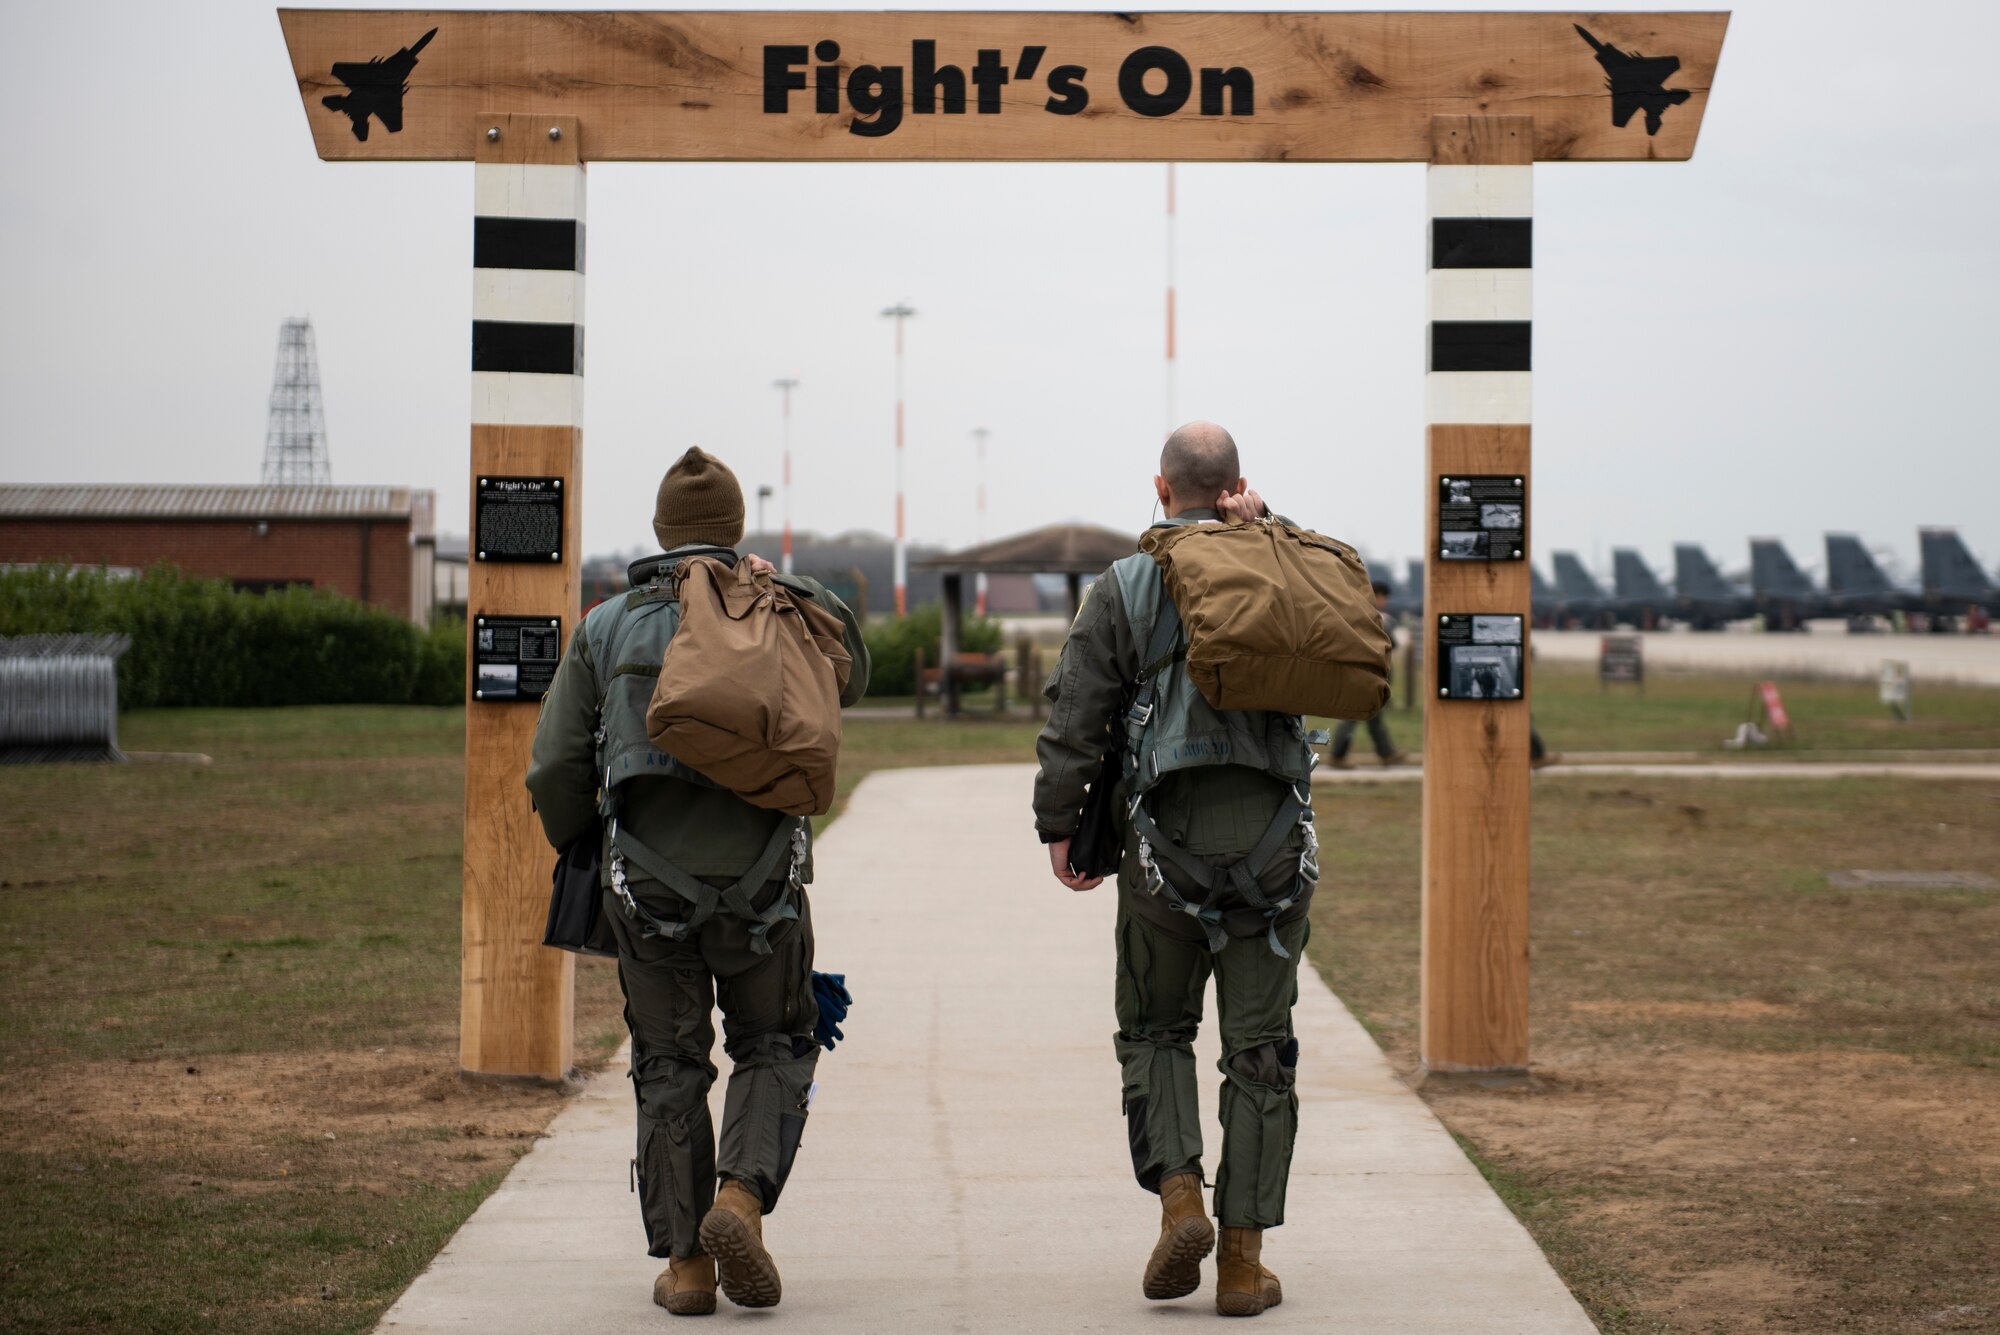 Aircrew assigned to the 494th Fighter Squadron step through the NEW heritage arch on their way to their aircraft at Royal Air Force Lakenheath, England, March 8, 2021. Liberty Wing aircrew and Airmen will walk under this arch on their way to carry out the 48th Fighter Wing mission for years to come. (U.S. Air Force photo by Airman 1st Class Jessi Monte)